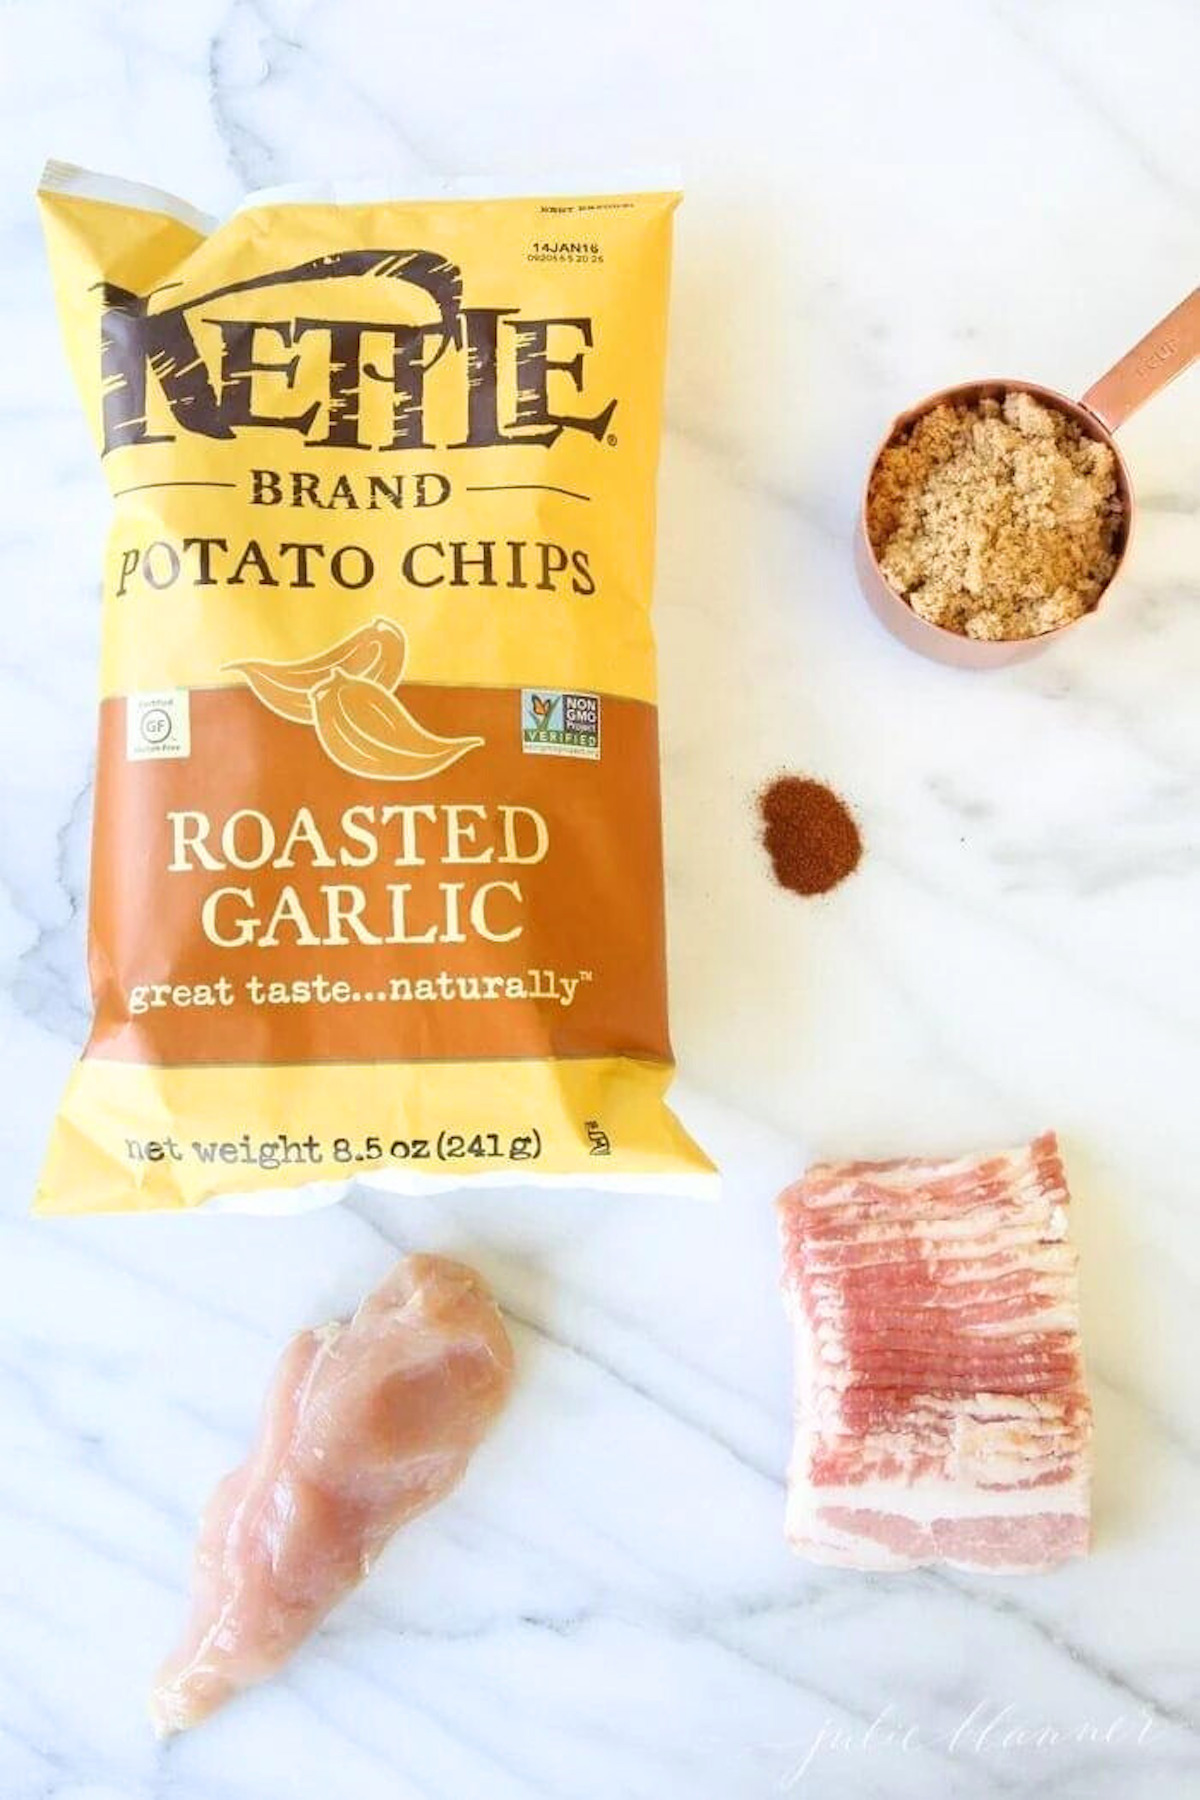 Delicious roasted garlic potato chips, the perfect accompaniment to any meal.